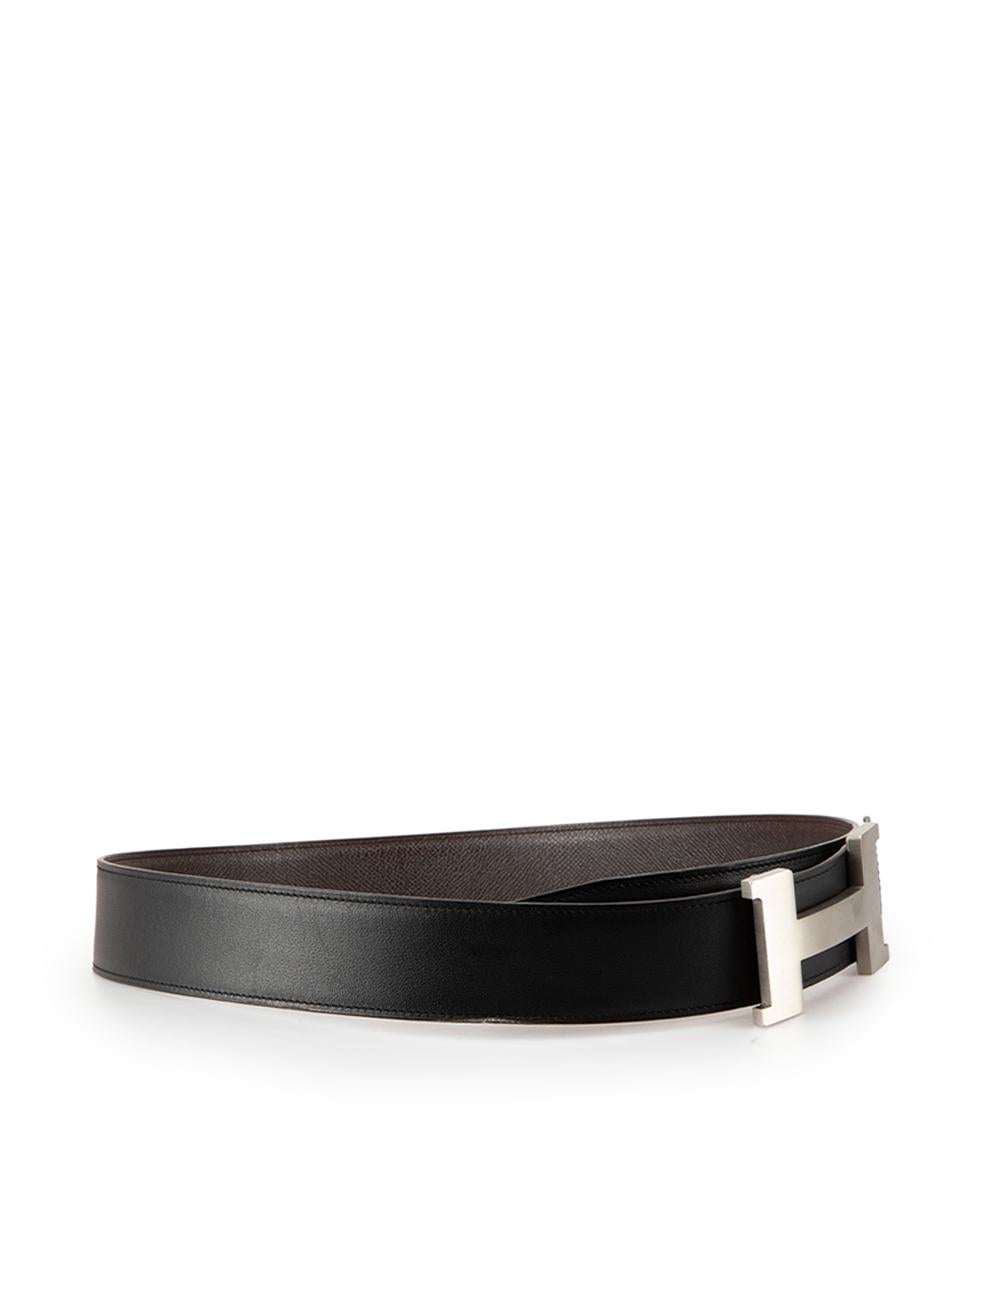 CONDITION is Very good. Minimal wear to belt is evident. Minimal wear to leather finish with minor indentations from buckle fastening and some warping of holes from use, mild scratching seen across the buckle surface on this used Hermès designer